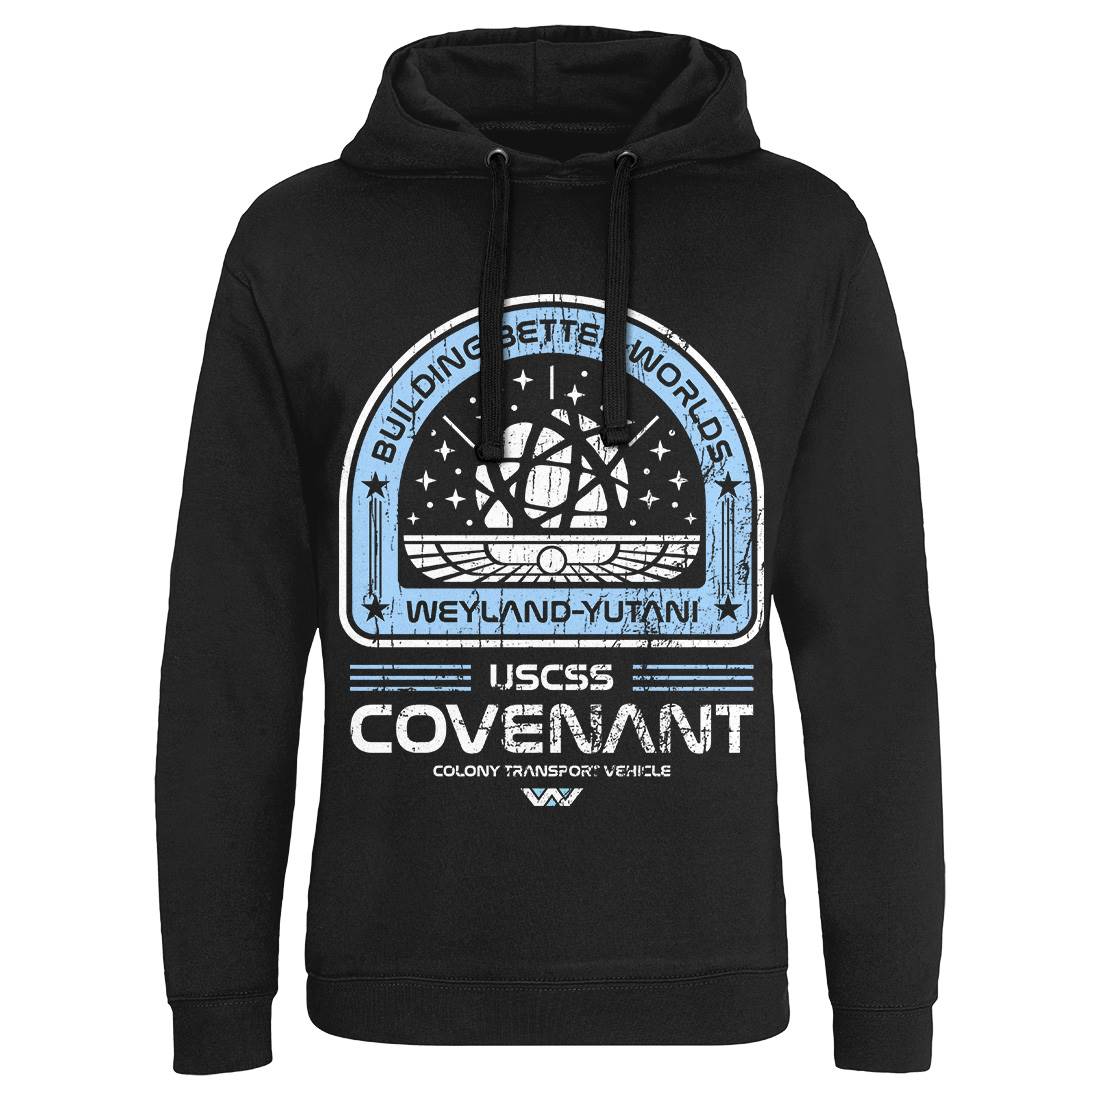 Covenant Mens Hoodie Without Pocket Space D203